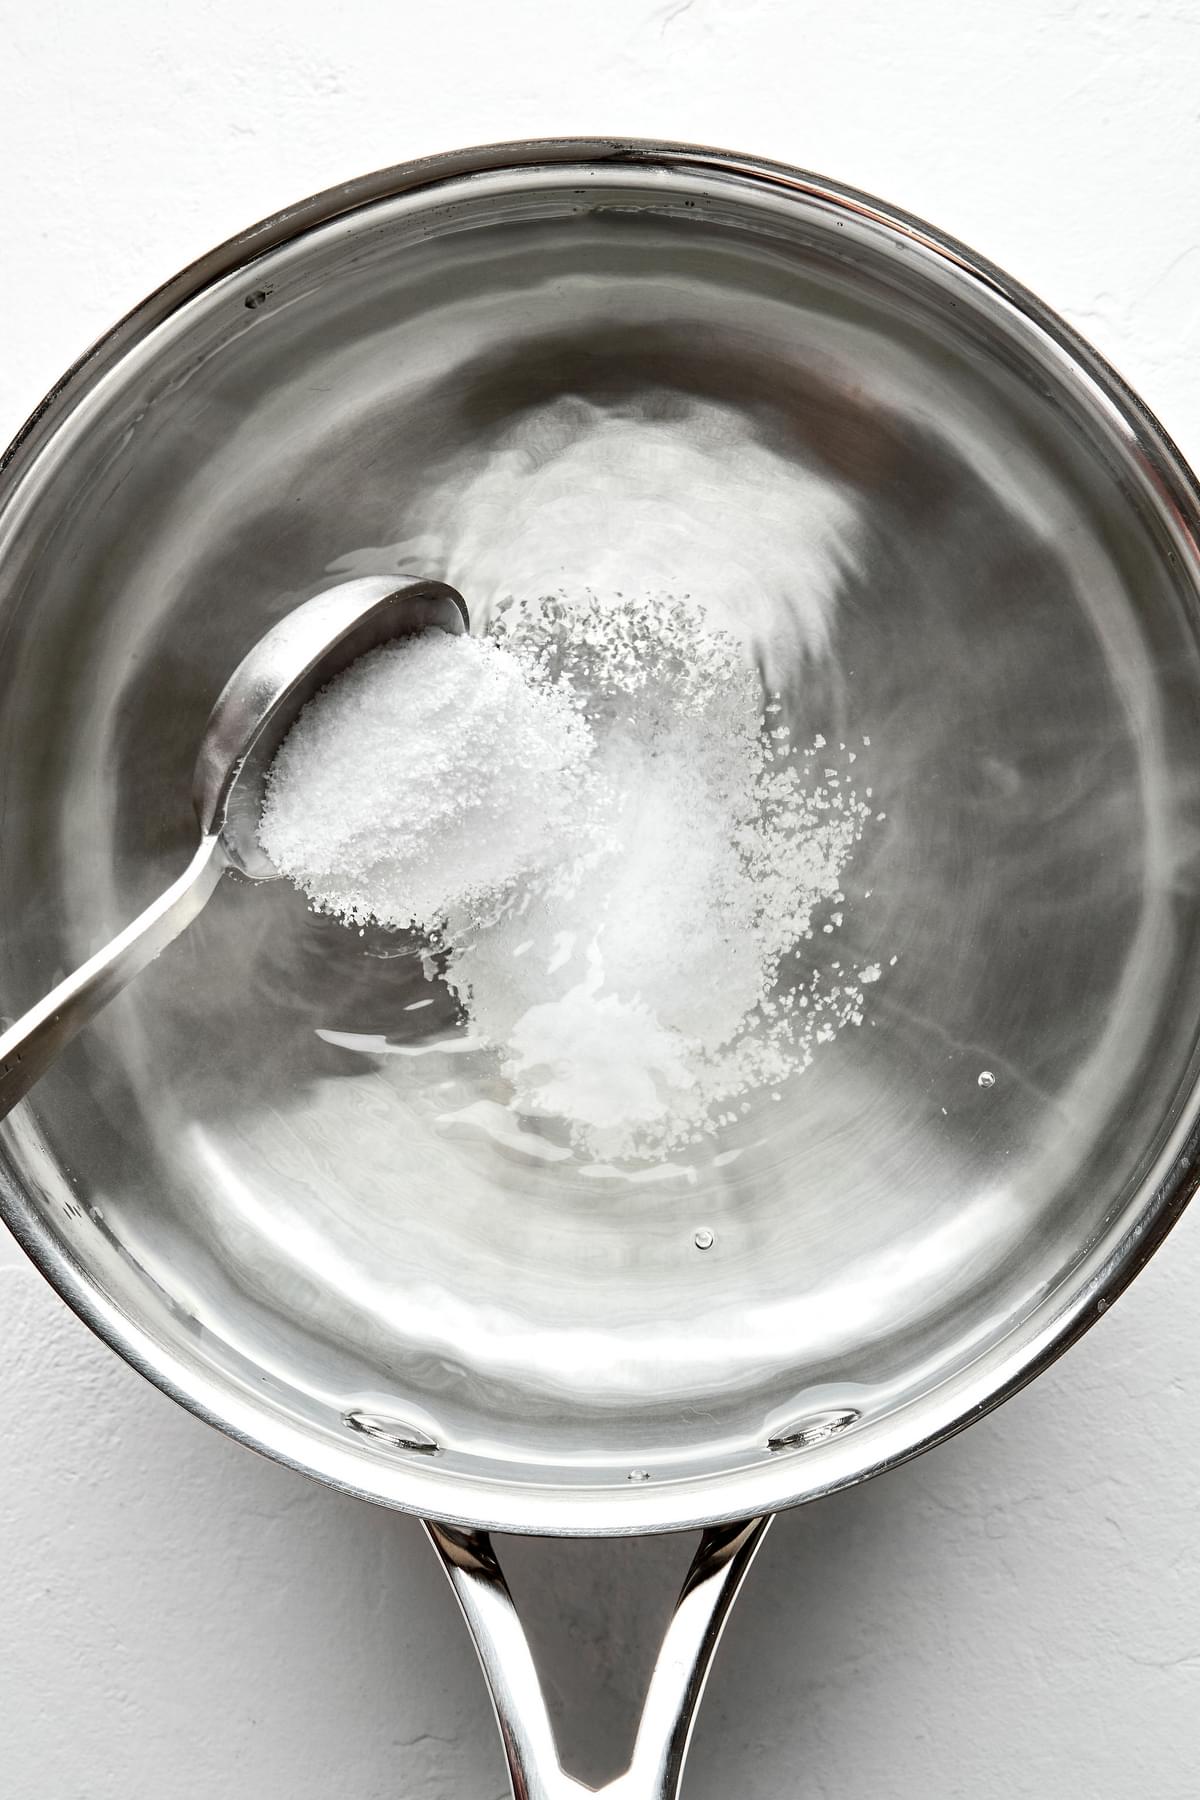 one tablespoon of salt being poured into a pot filled with 4 quarts of water to use to cook pasta noodles